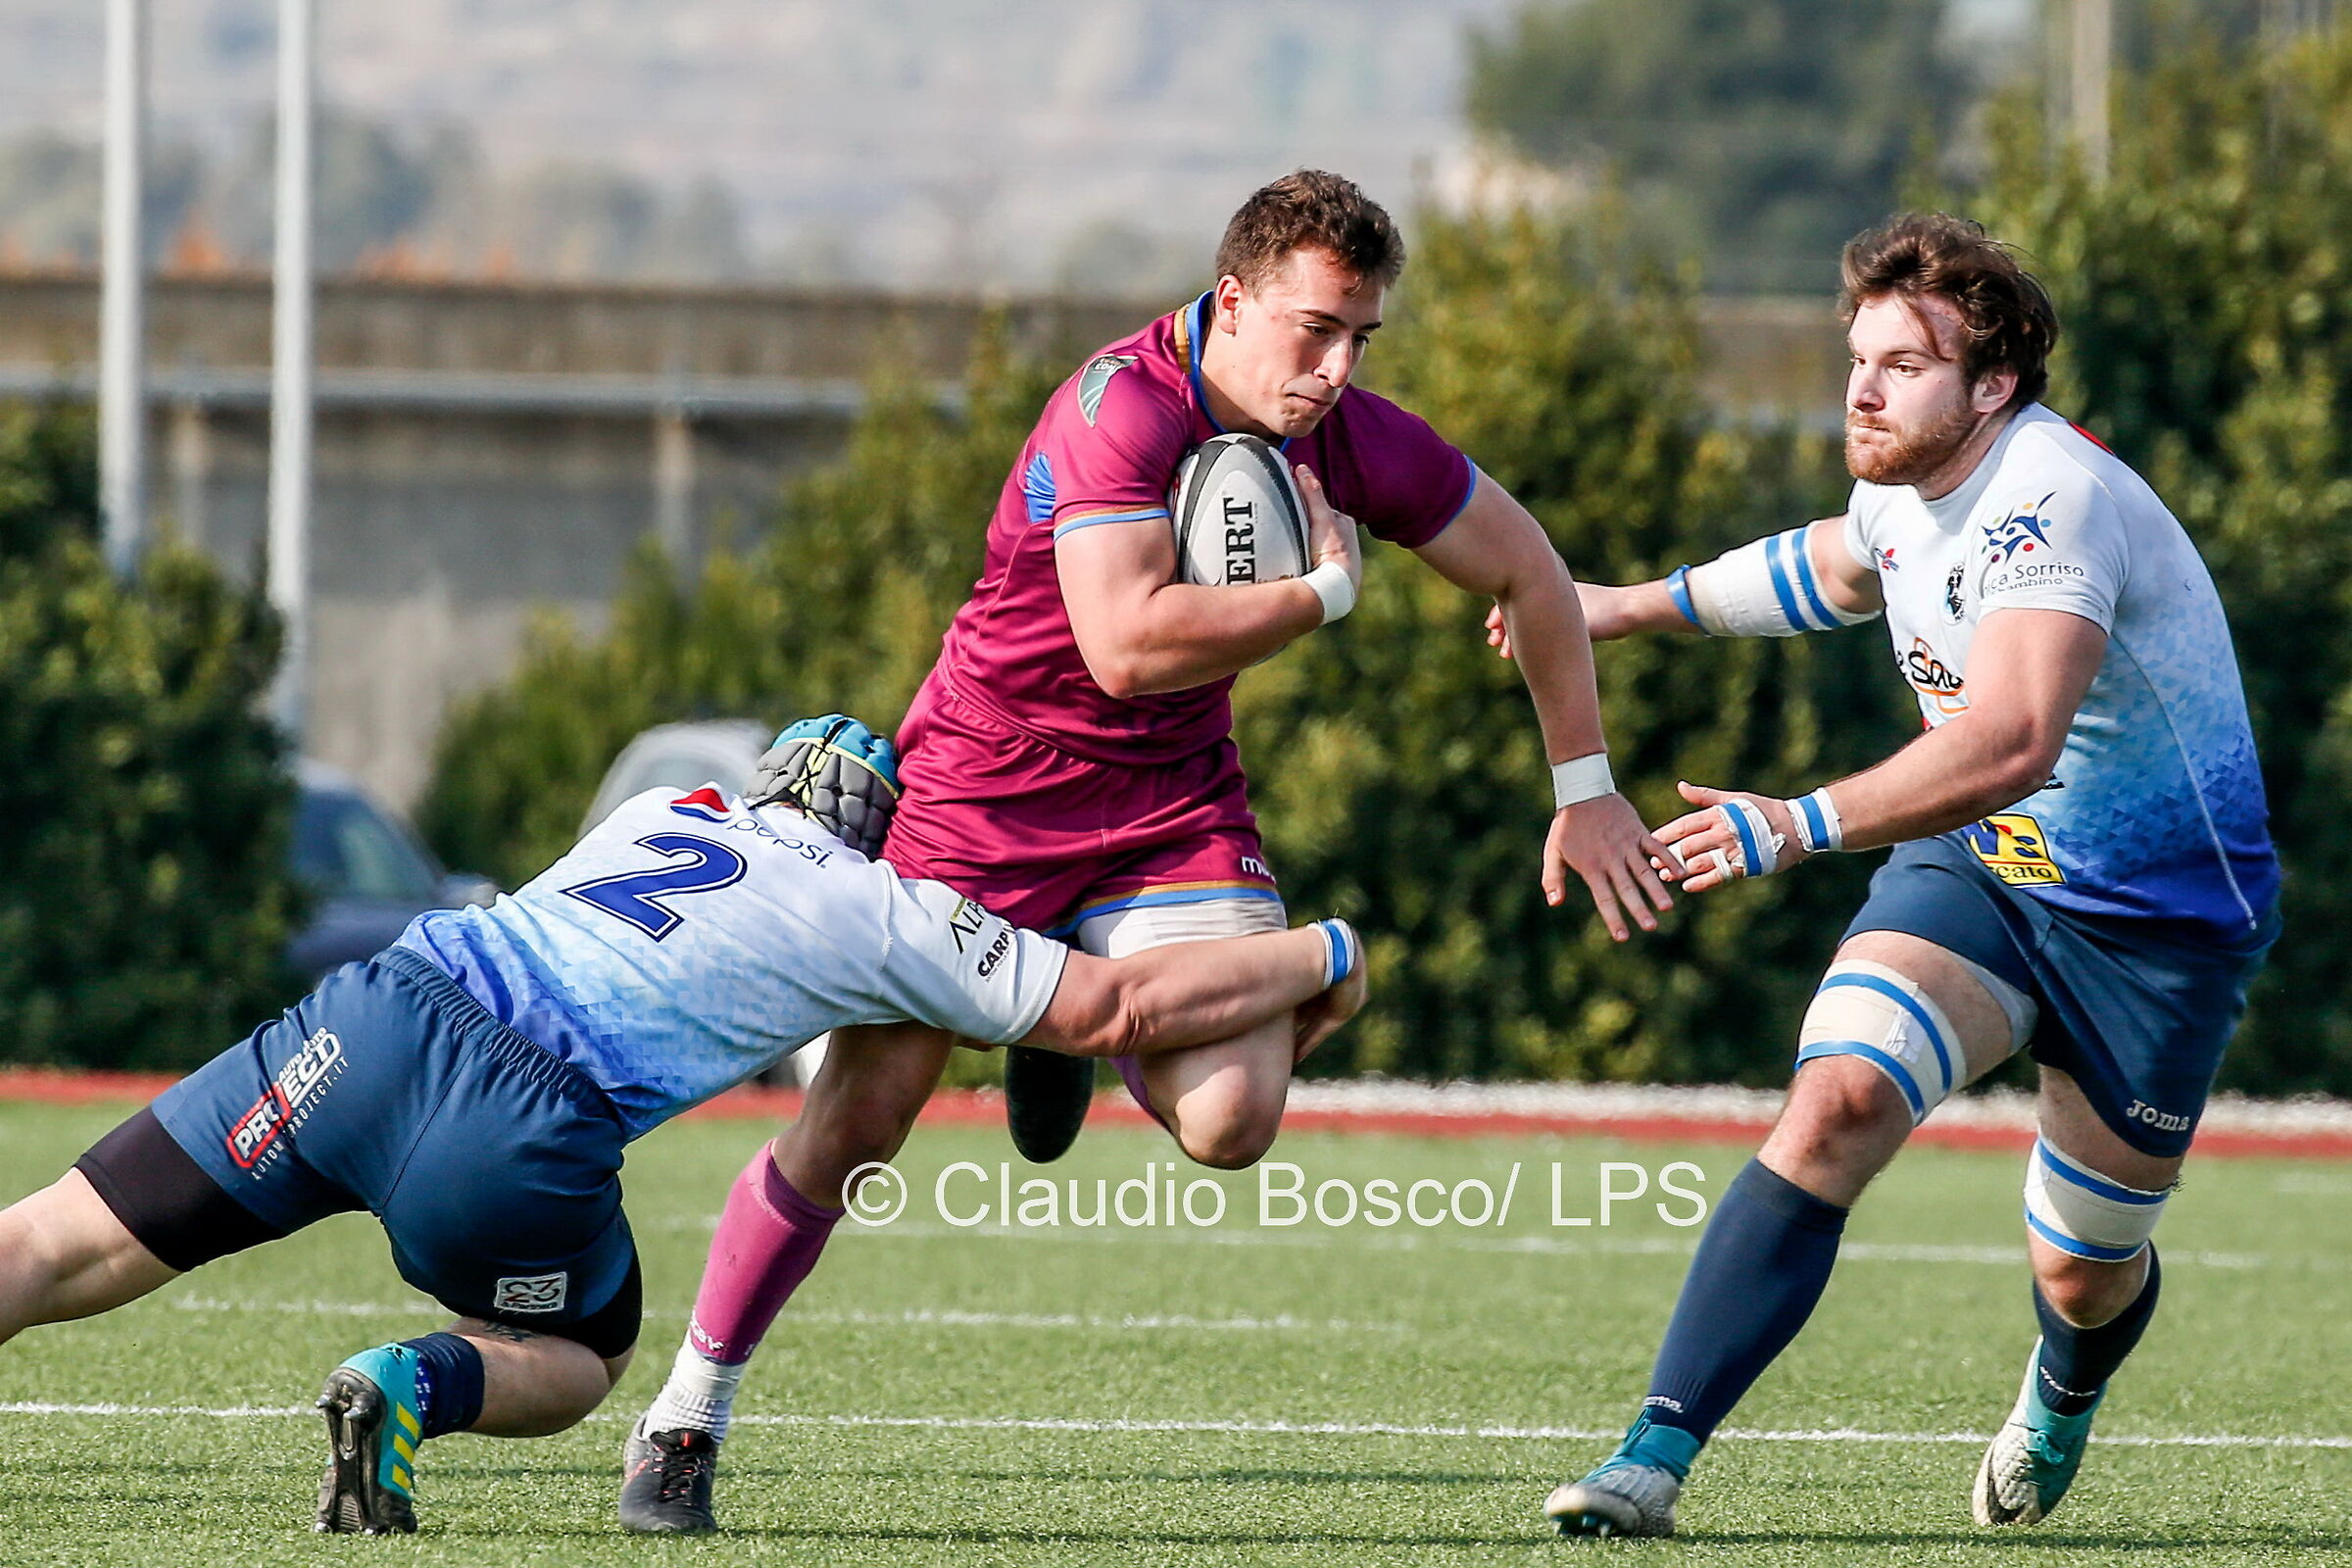 Flames Gold Rugby vs Valsugana rugby Padova...